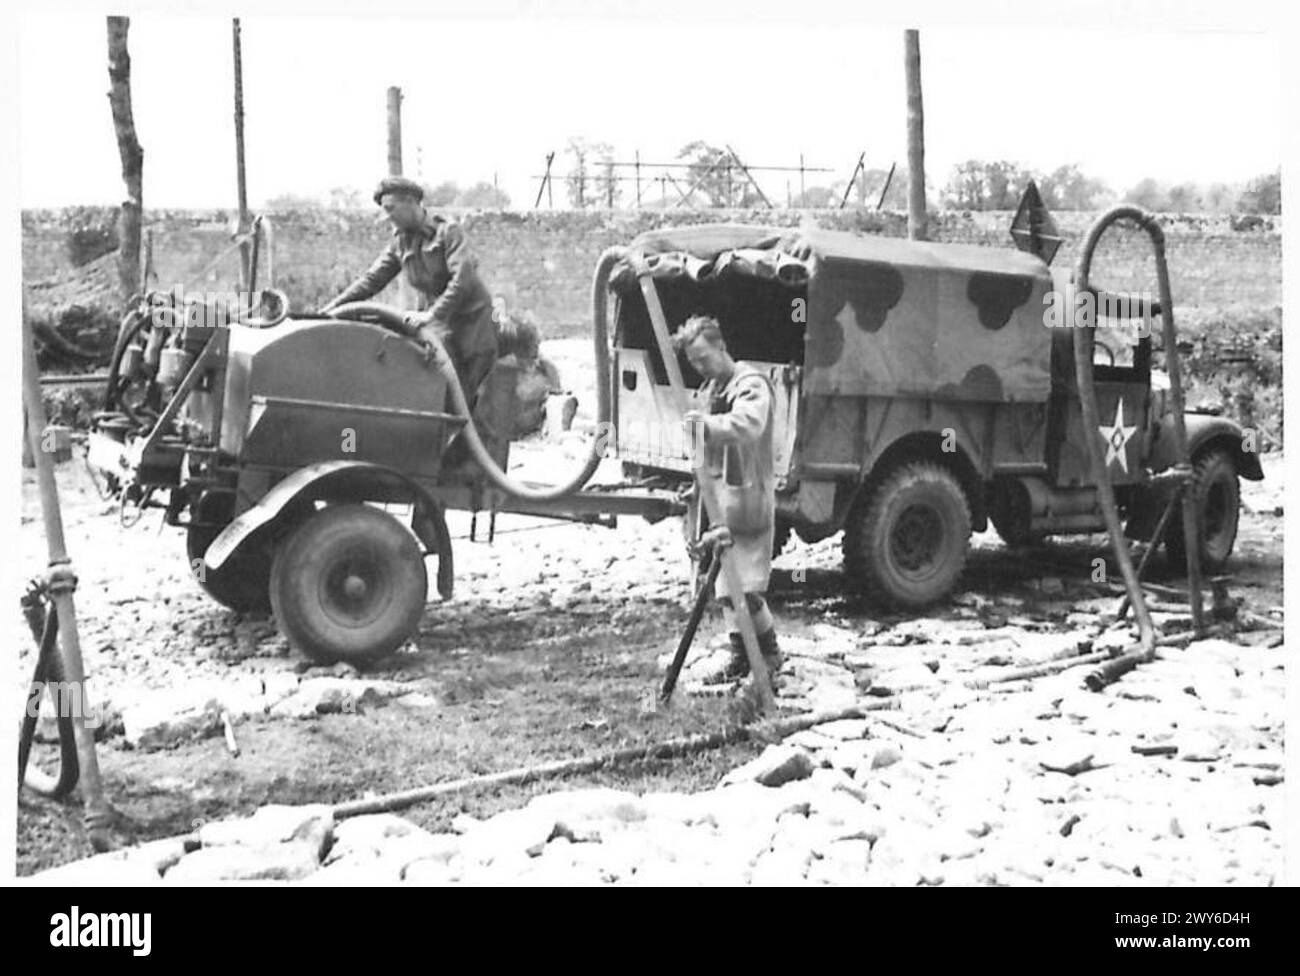 NORMANDY - VARIOUS - Water points have been set up at various points in the Normandy B 5669 bridgehead. At this water point at Creully, Driver S.H.Bevan of Rose Corrage, Osbaston, Monmouth, (right) comes to fill a water trailer from the pump operated by Sapper J.M.Gilmartin of 8 Commercial Street, Normanton, Yorks. Driver S.H.Bevan - 235 Field Park Company, RE. Sapper Gilmartin - 413 Field Company, RE. , British Army, 21st Army Group Stock Photo